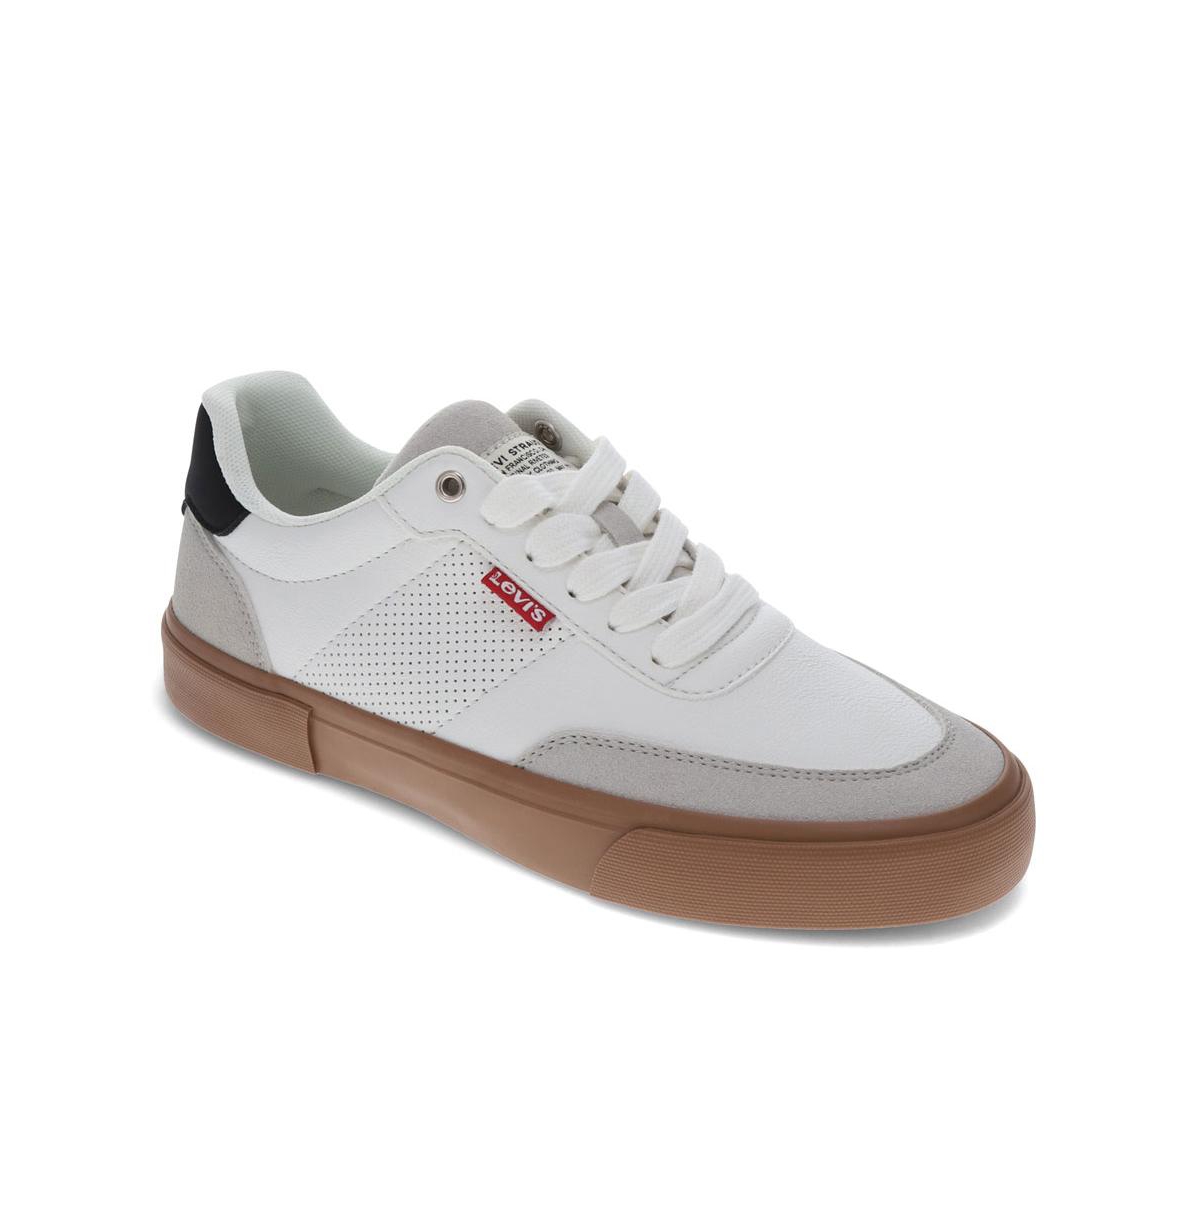 Levi's Women's Maribel Ul Synthetic Leather Low Top Casual Lace Up Sneaker Shoe In White,cement,gum